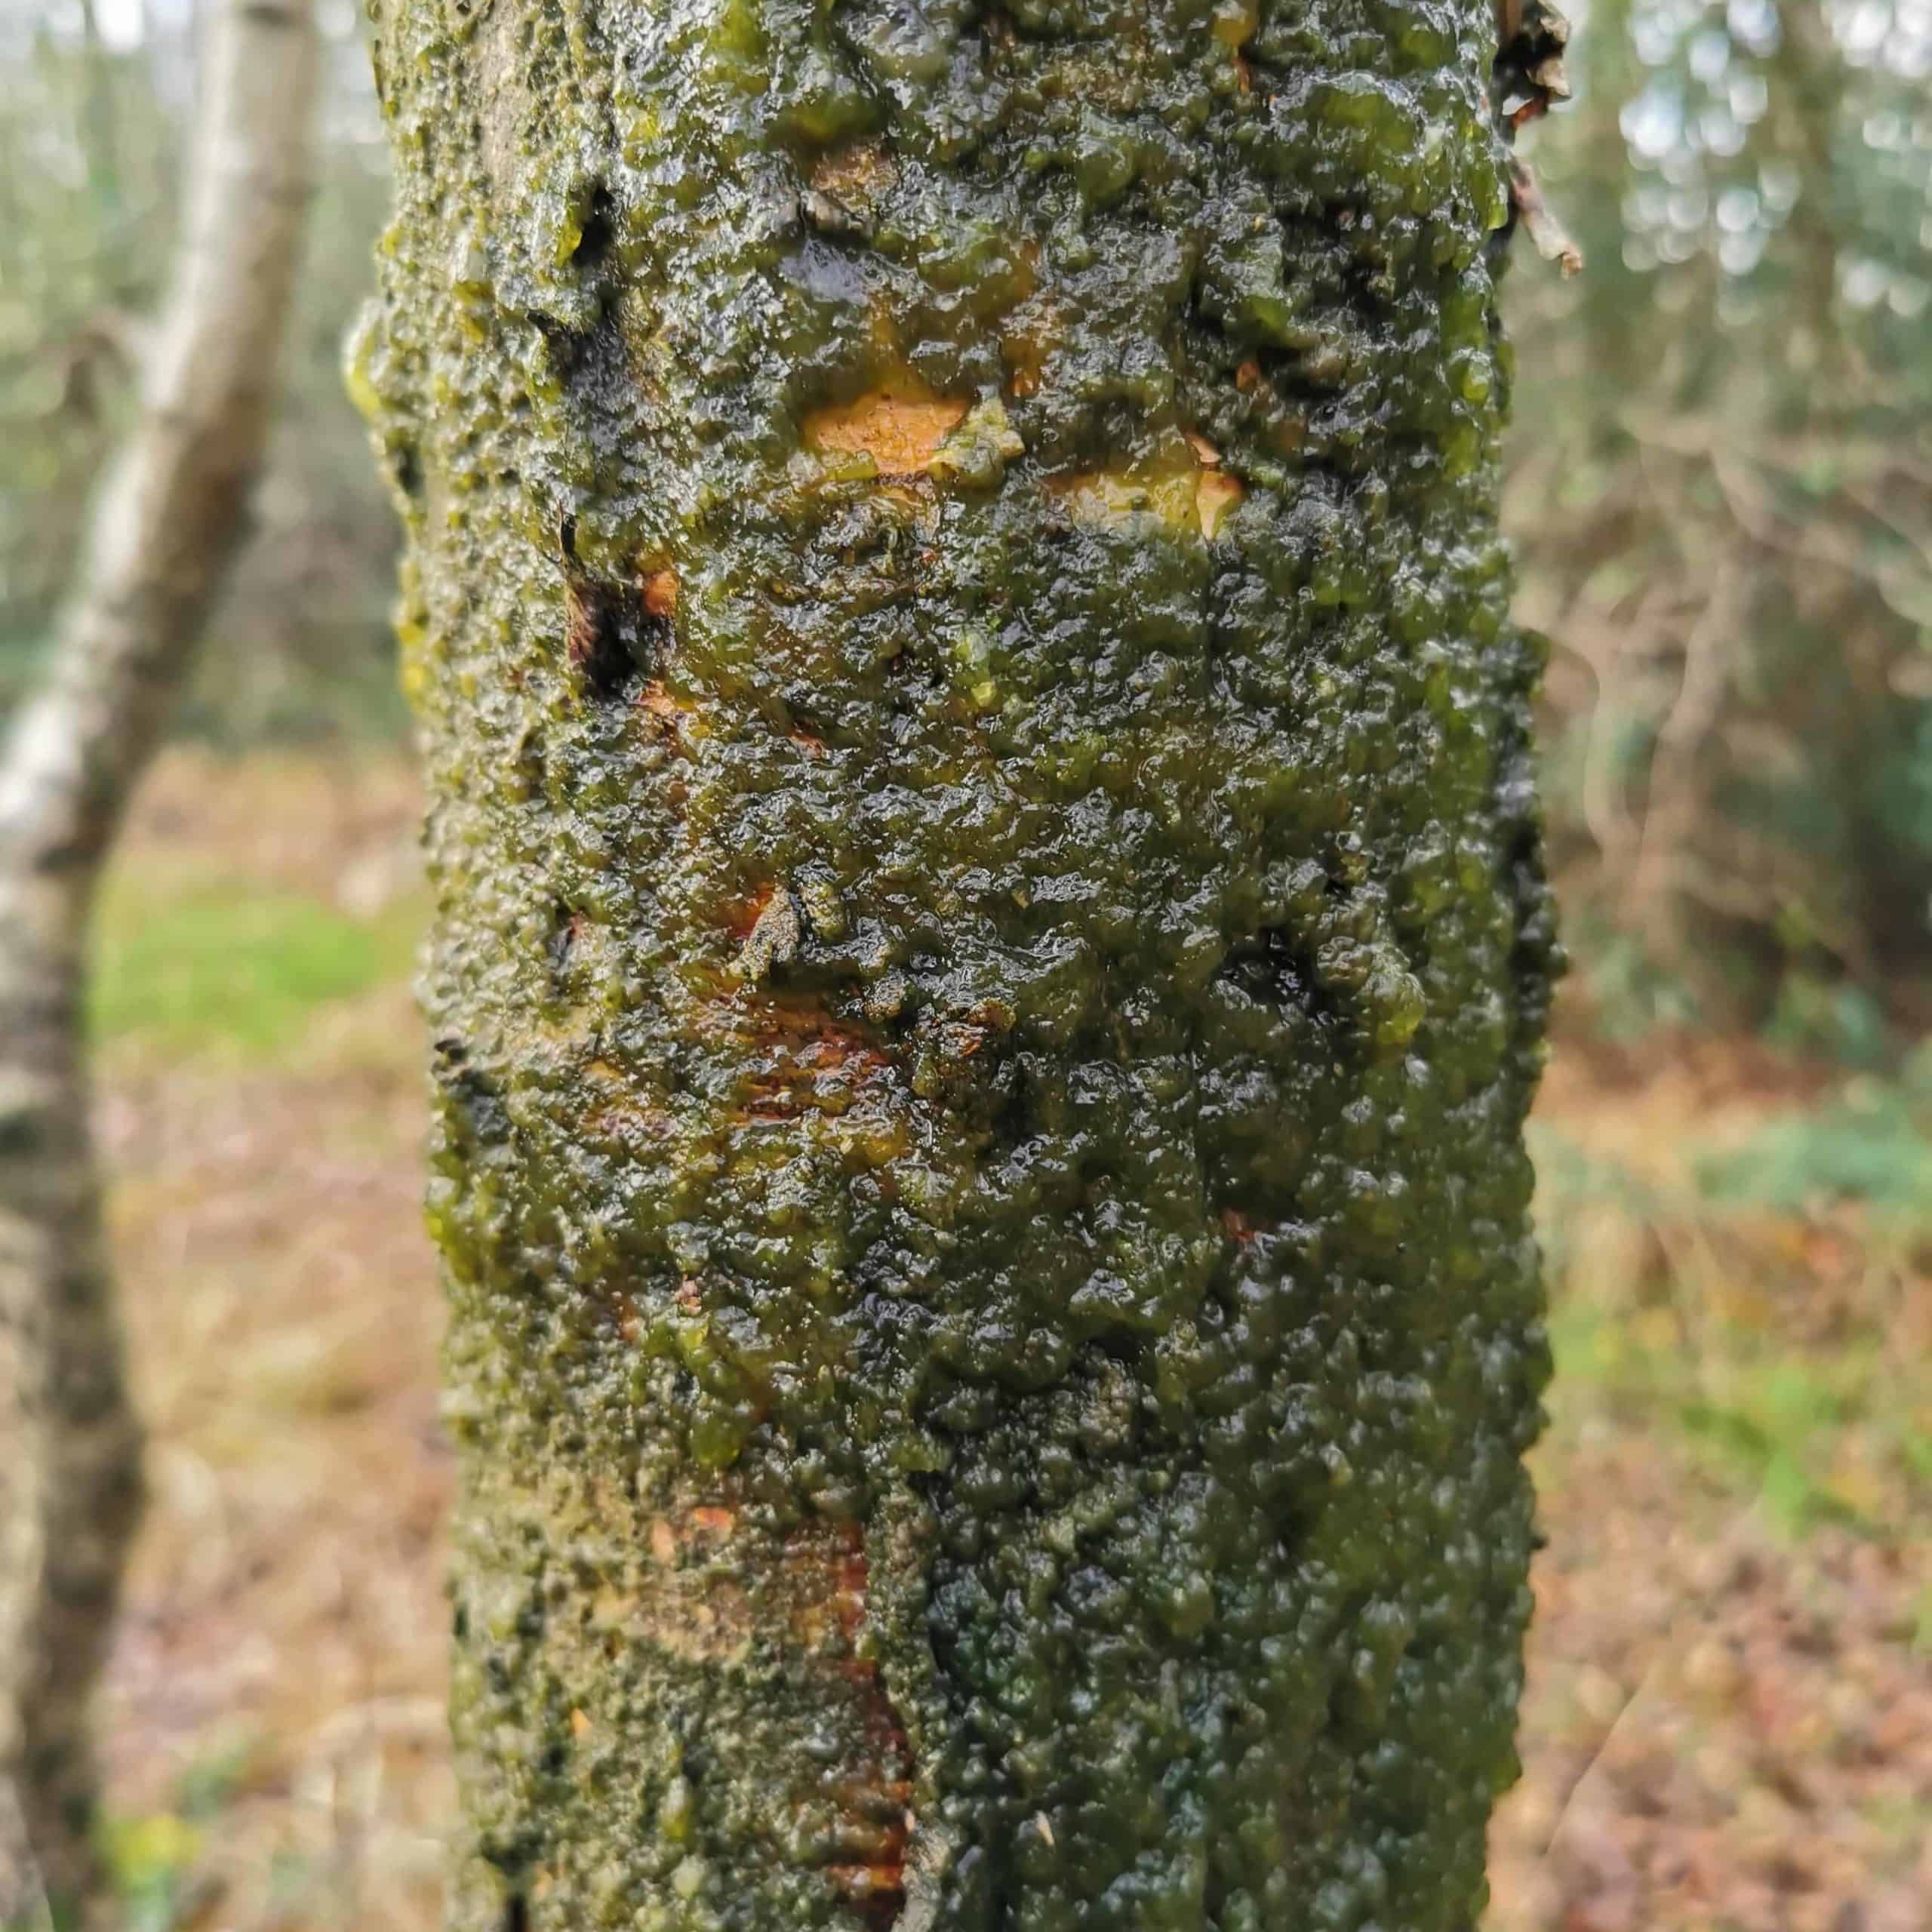 Ammonia emissions have caused this tree trunk to become covered with nitrogen-loving algal slime.